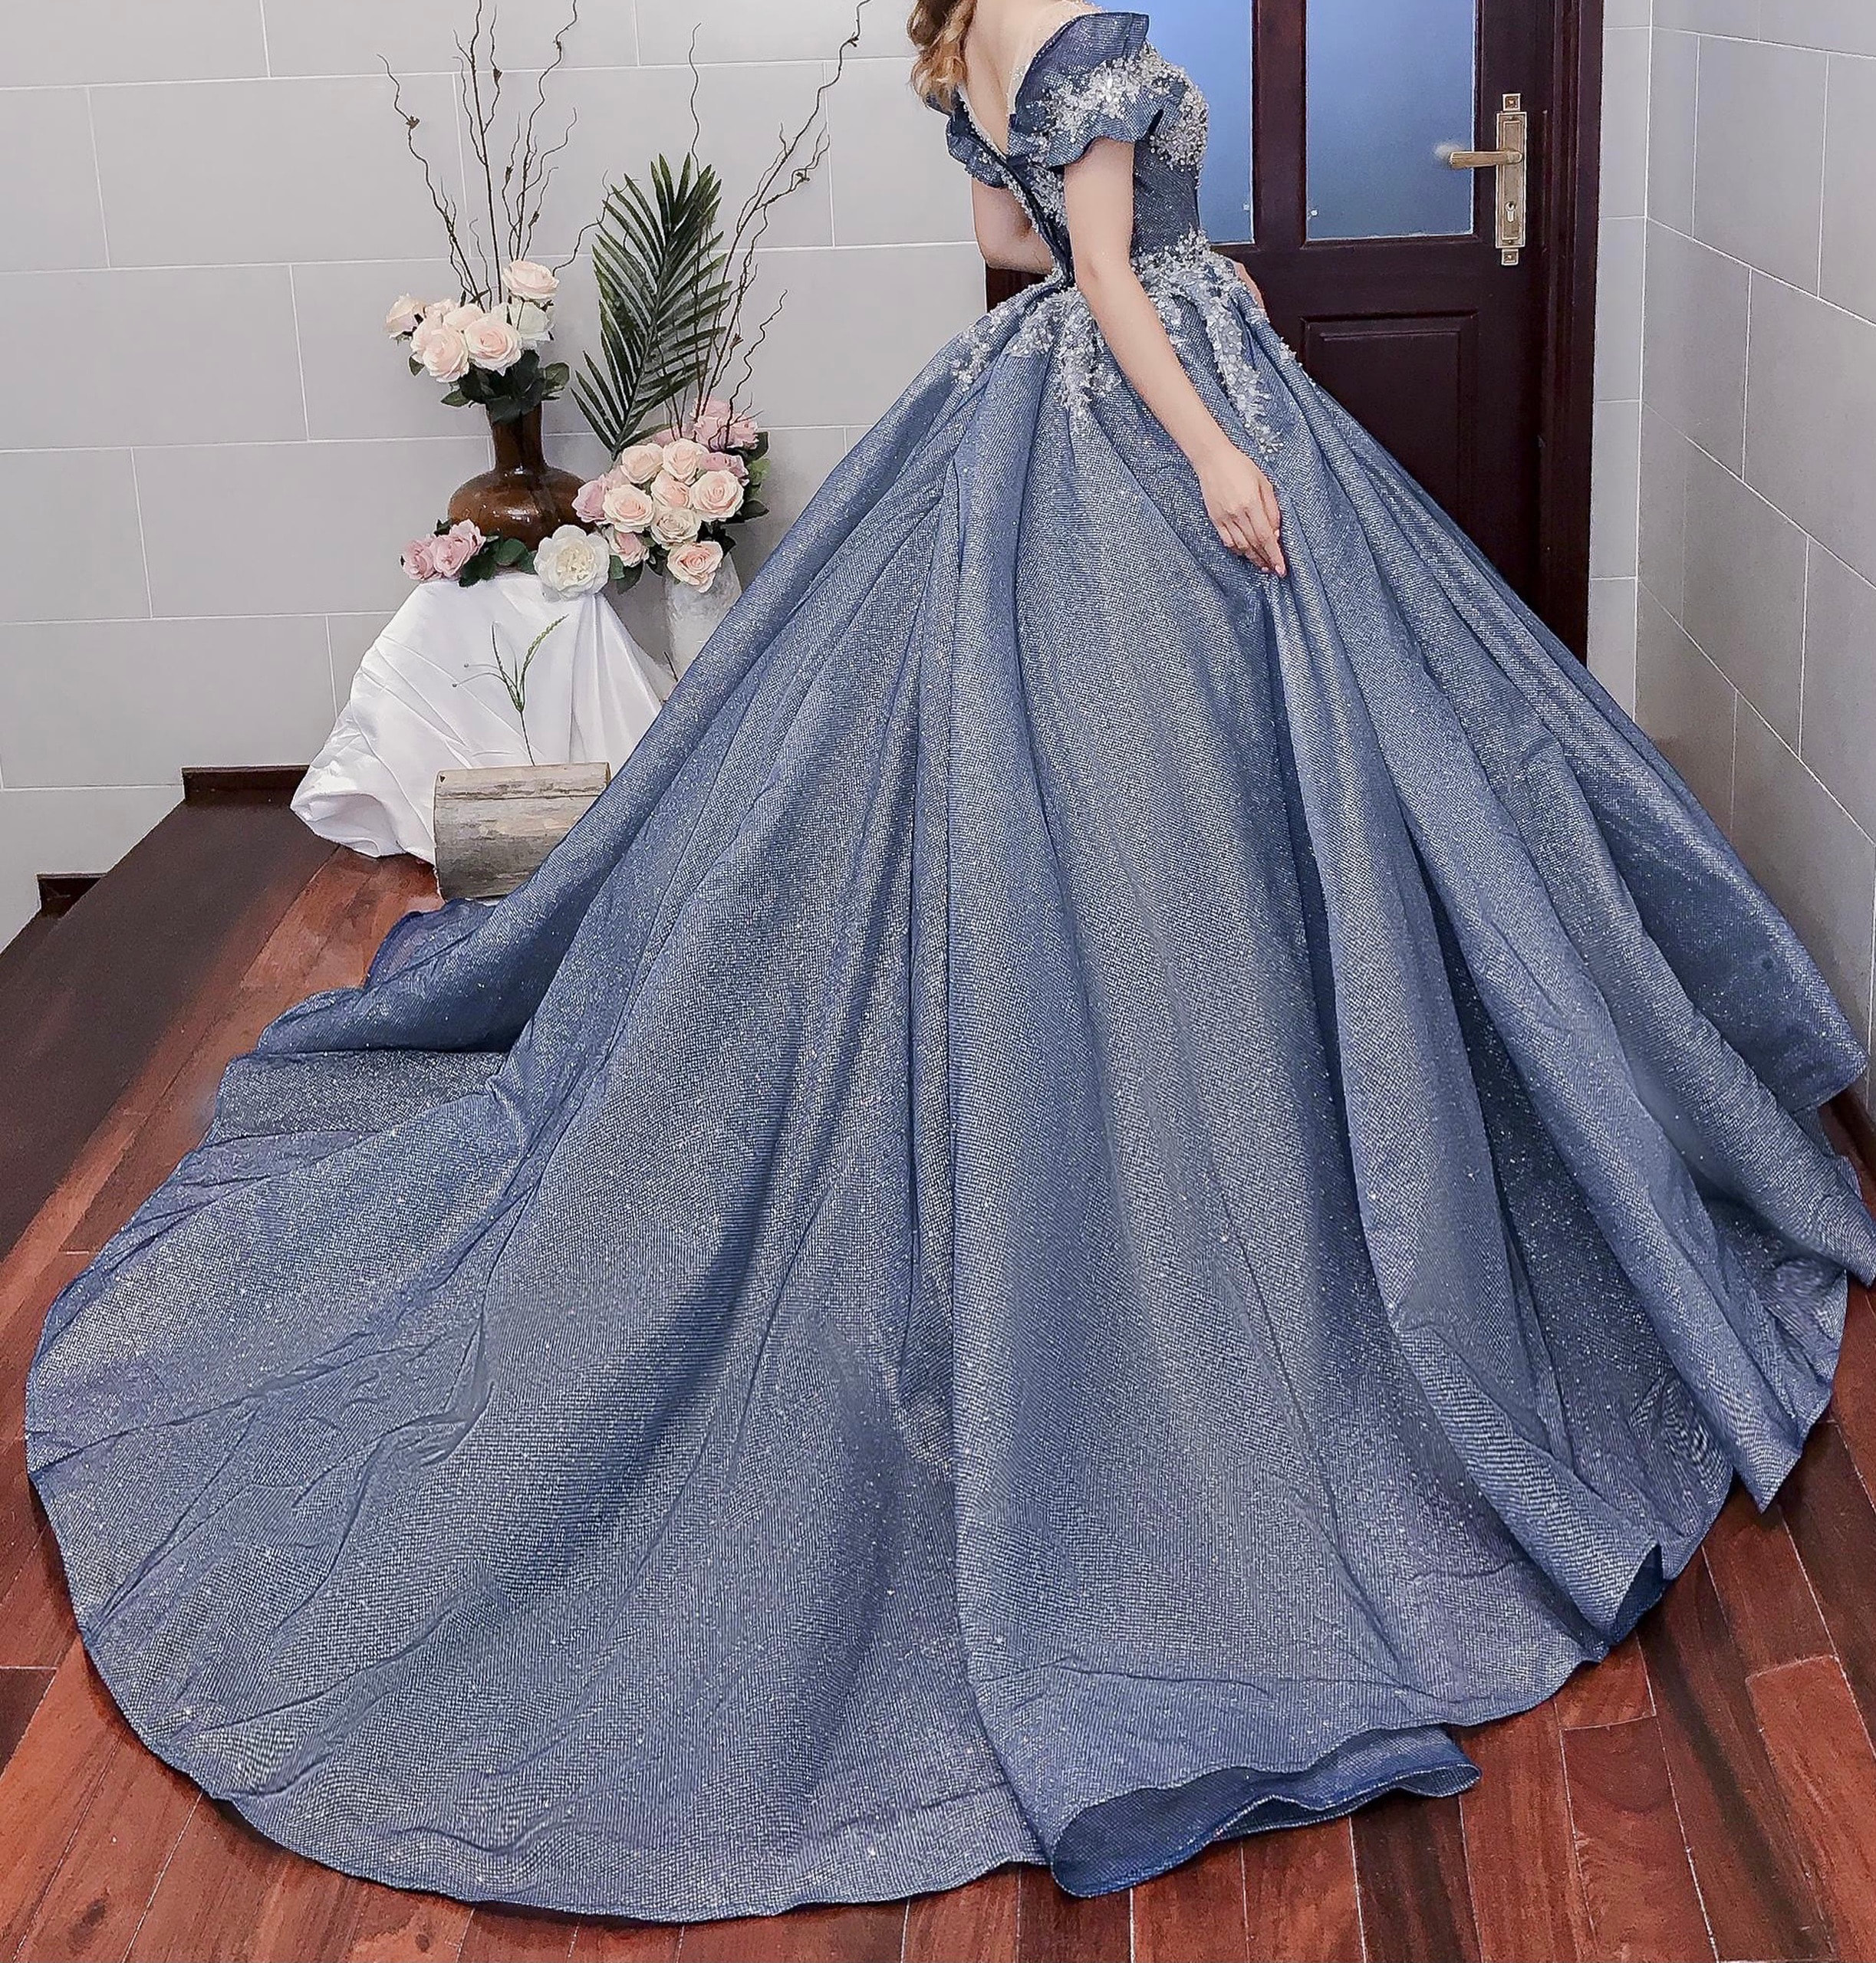 Mysterious blue sparkle ball gown wedding dress with court train & glitter tulle - various styles